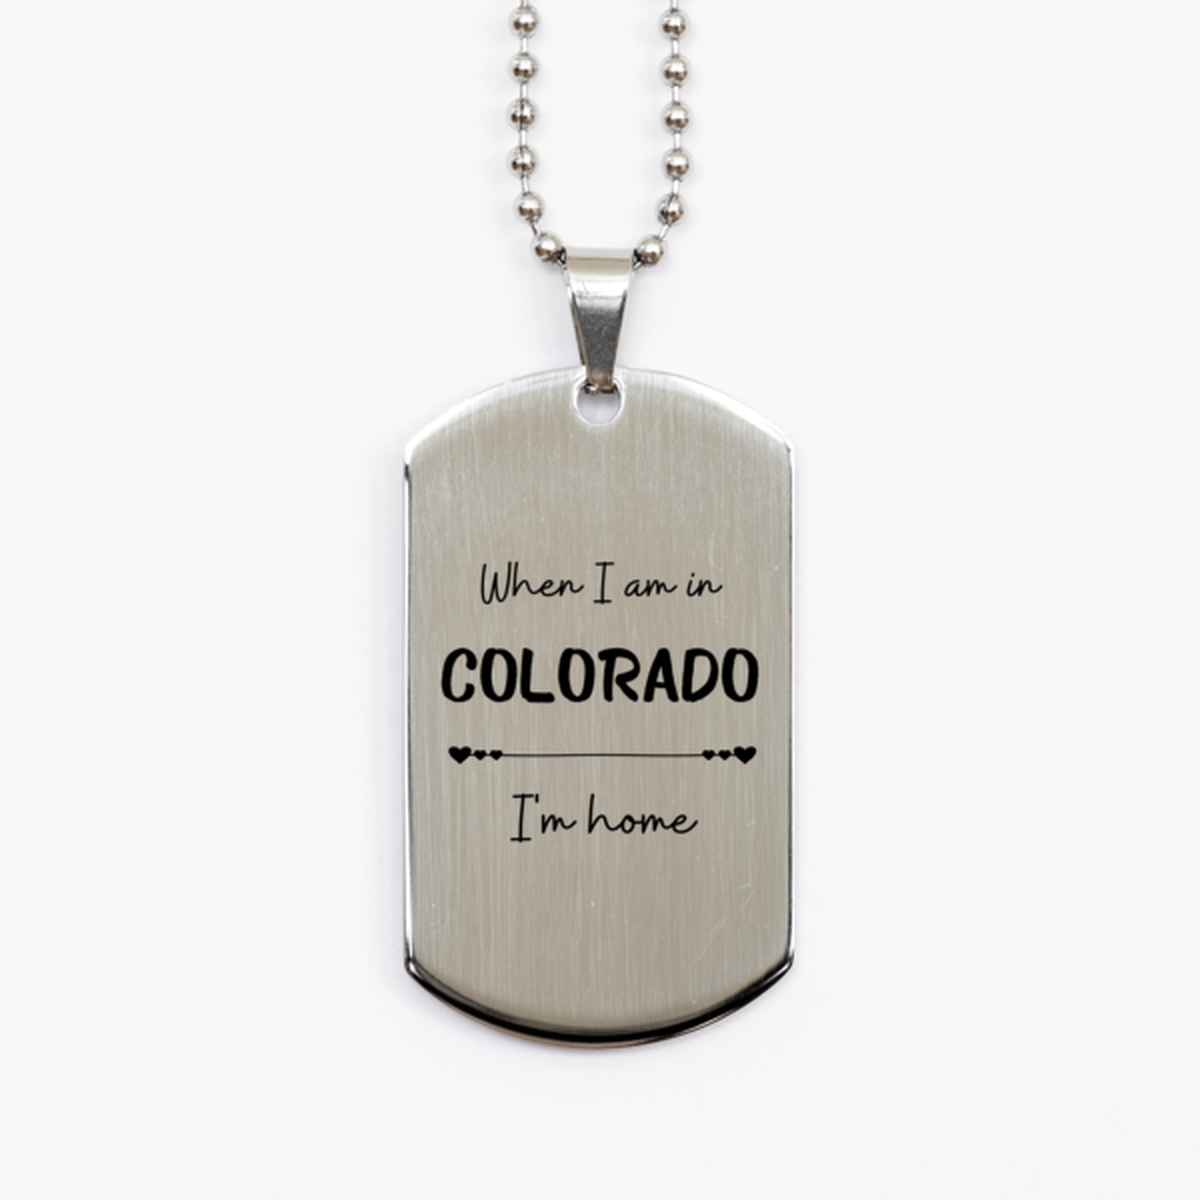 When I am in Colorado I'm home Silver Dog Tag, Cheap Gifts For Colorado, State Colorado Birthday Gifts for Friends Coworker